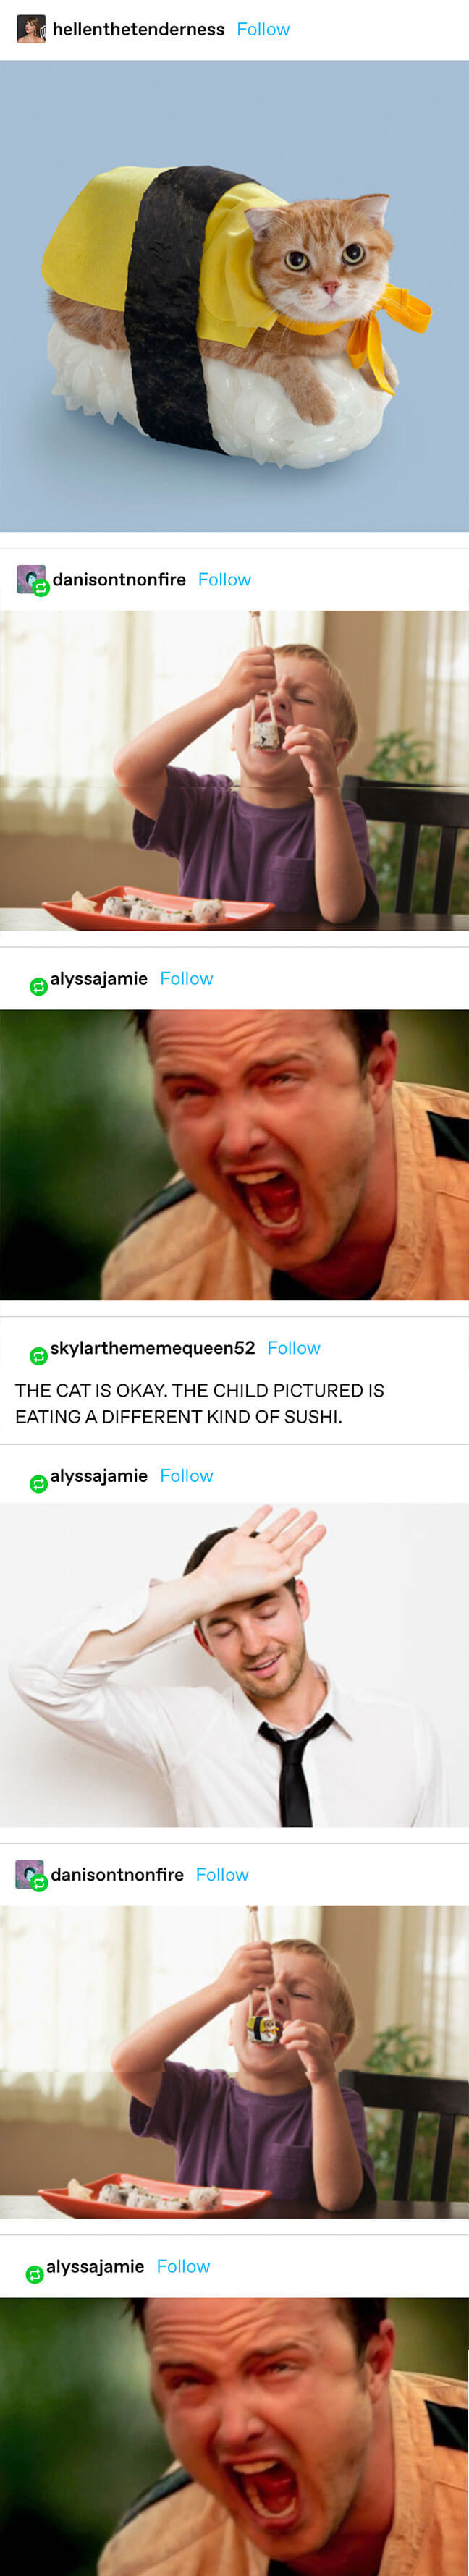 a cat on sushi is pictured, then a kid eating sushi. There&#x27;s a screaming meme but then the person is assured it&#x27;s a different sushi. Someone photoshops the original sushi with the cat in the picture and there&#x27;s another screaming meme